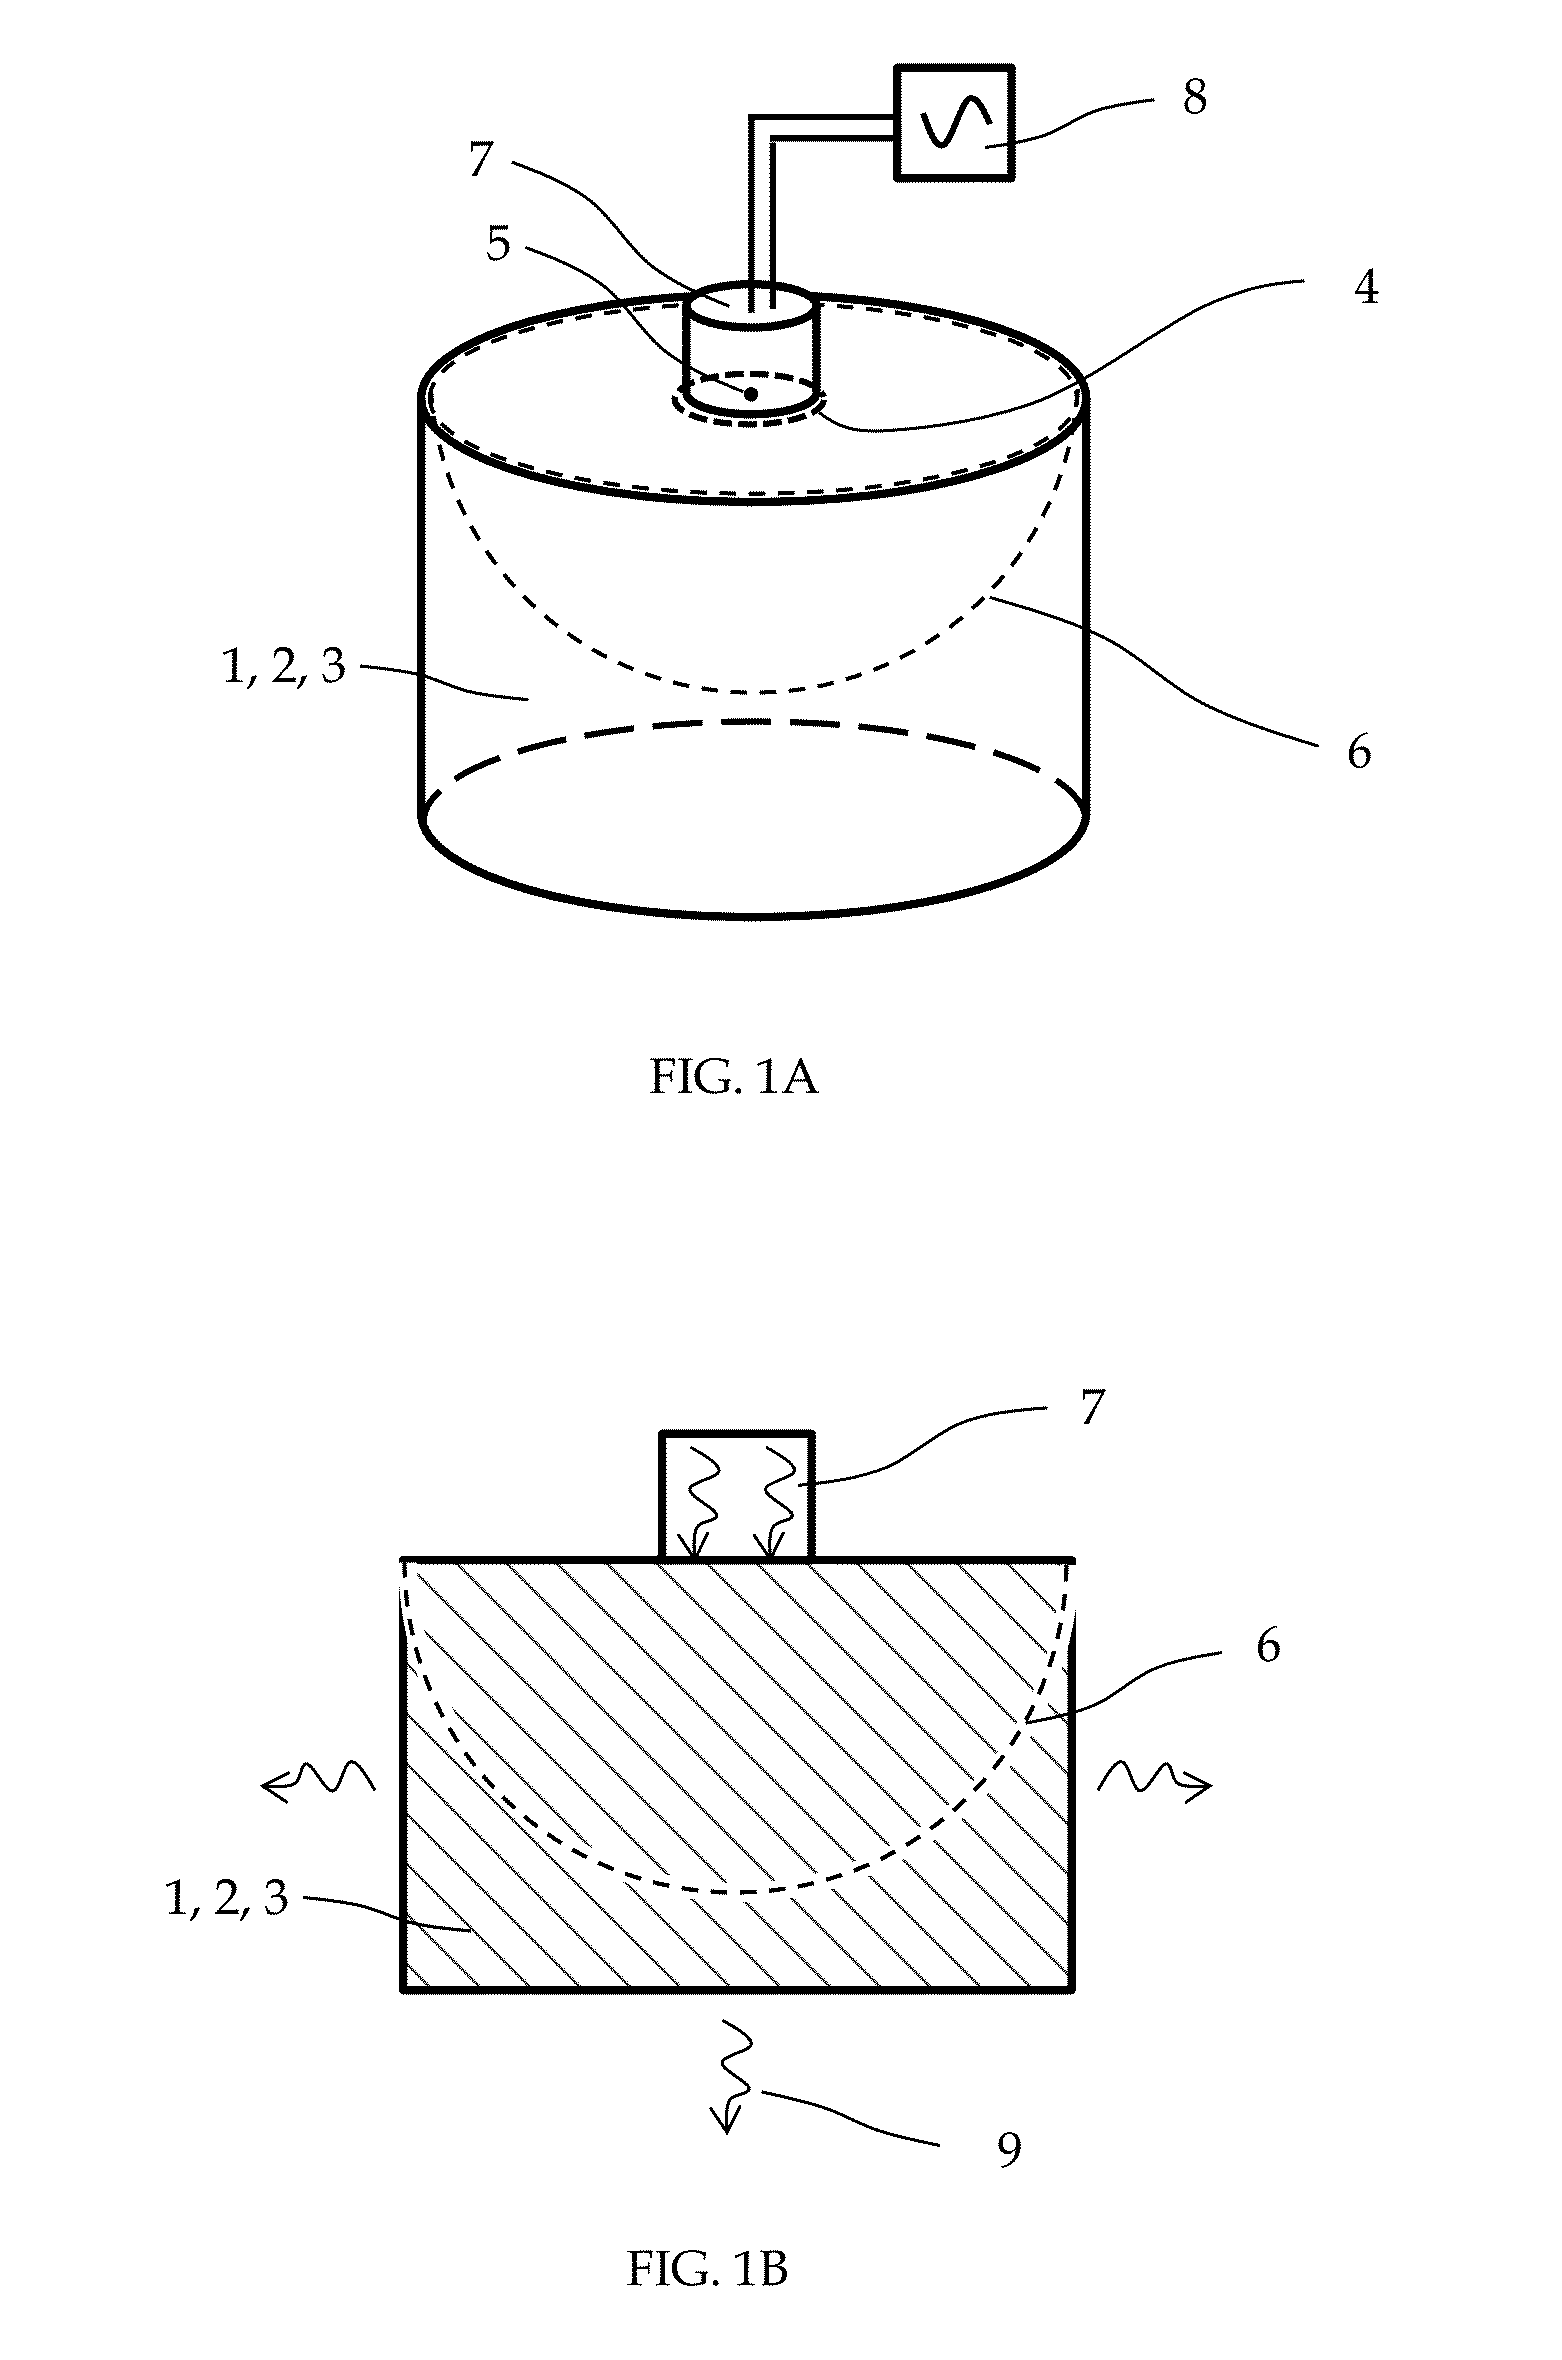 Apparatus and method for assessing thermo-mechanical fatigue related phenomena within a test material